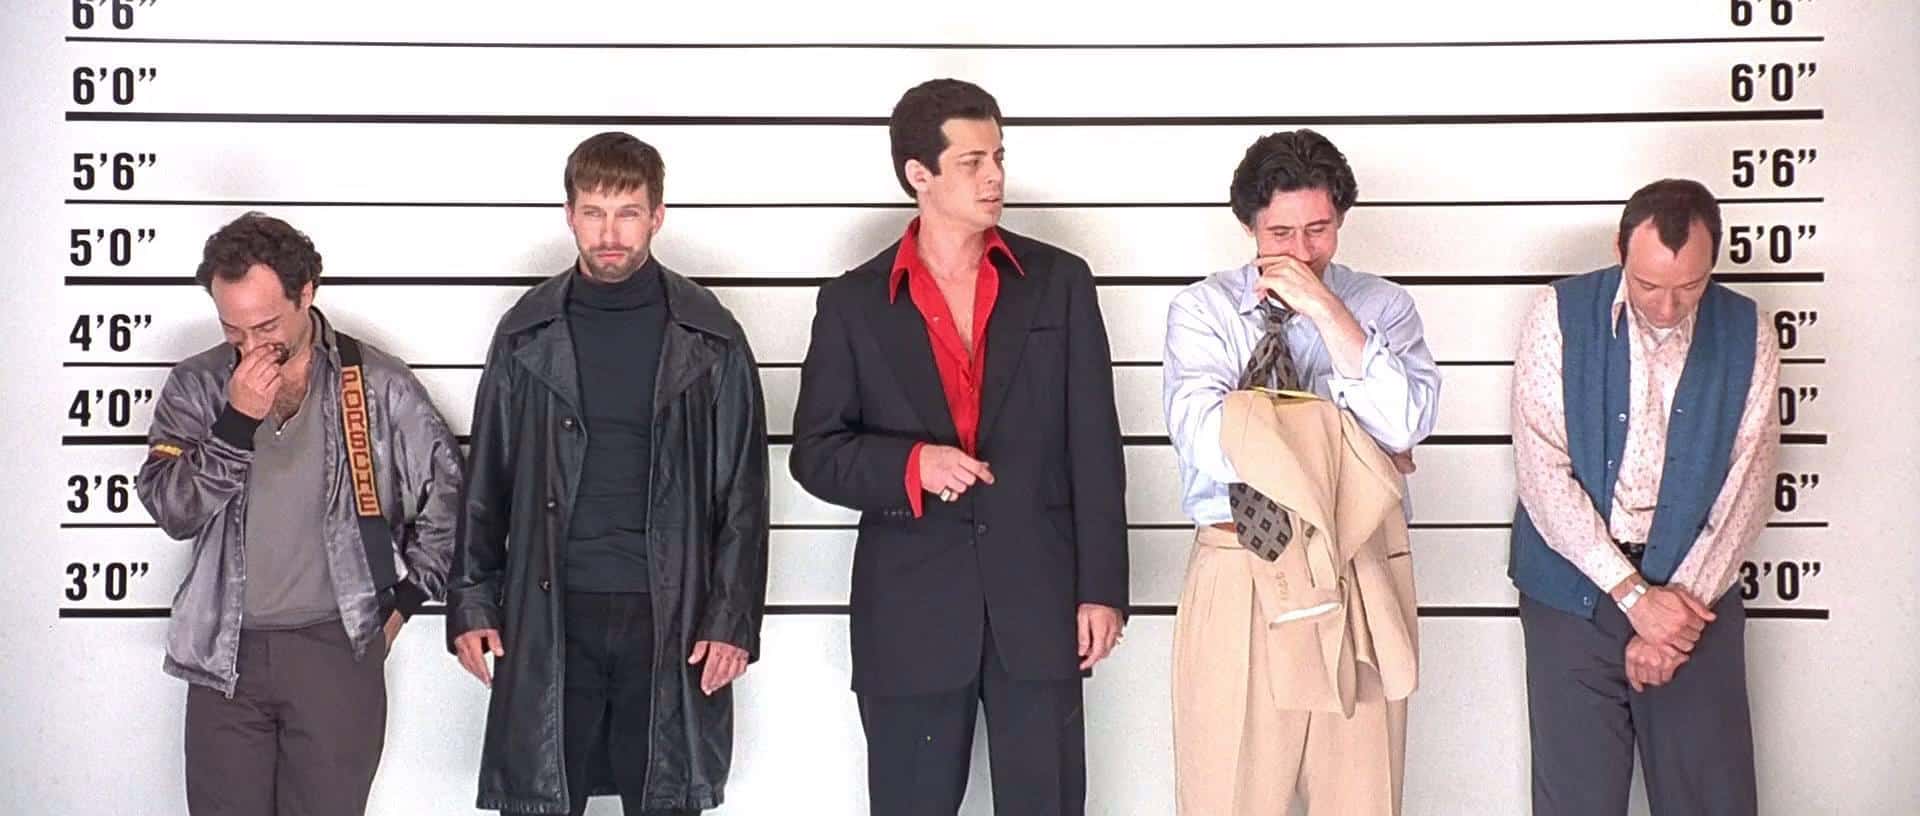 Kevin Spacey, Stephen Baldwin, Gabriel Byrne, Benicio Del Toro, and Kevin Pollak in The Usual Suspects (1995)